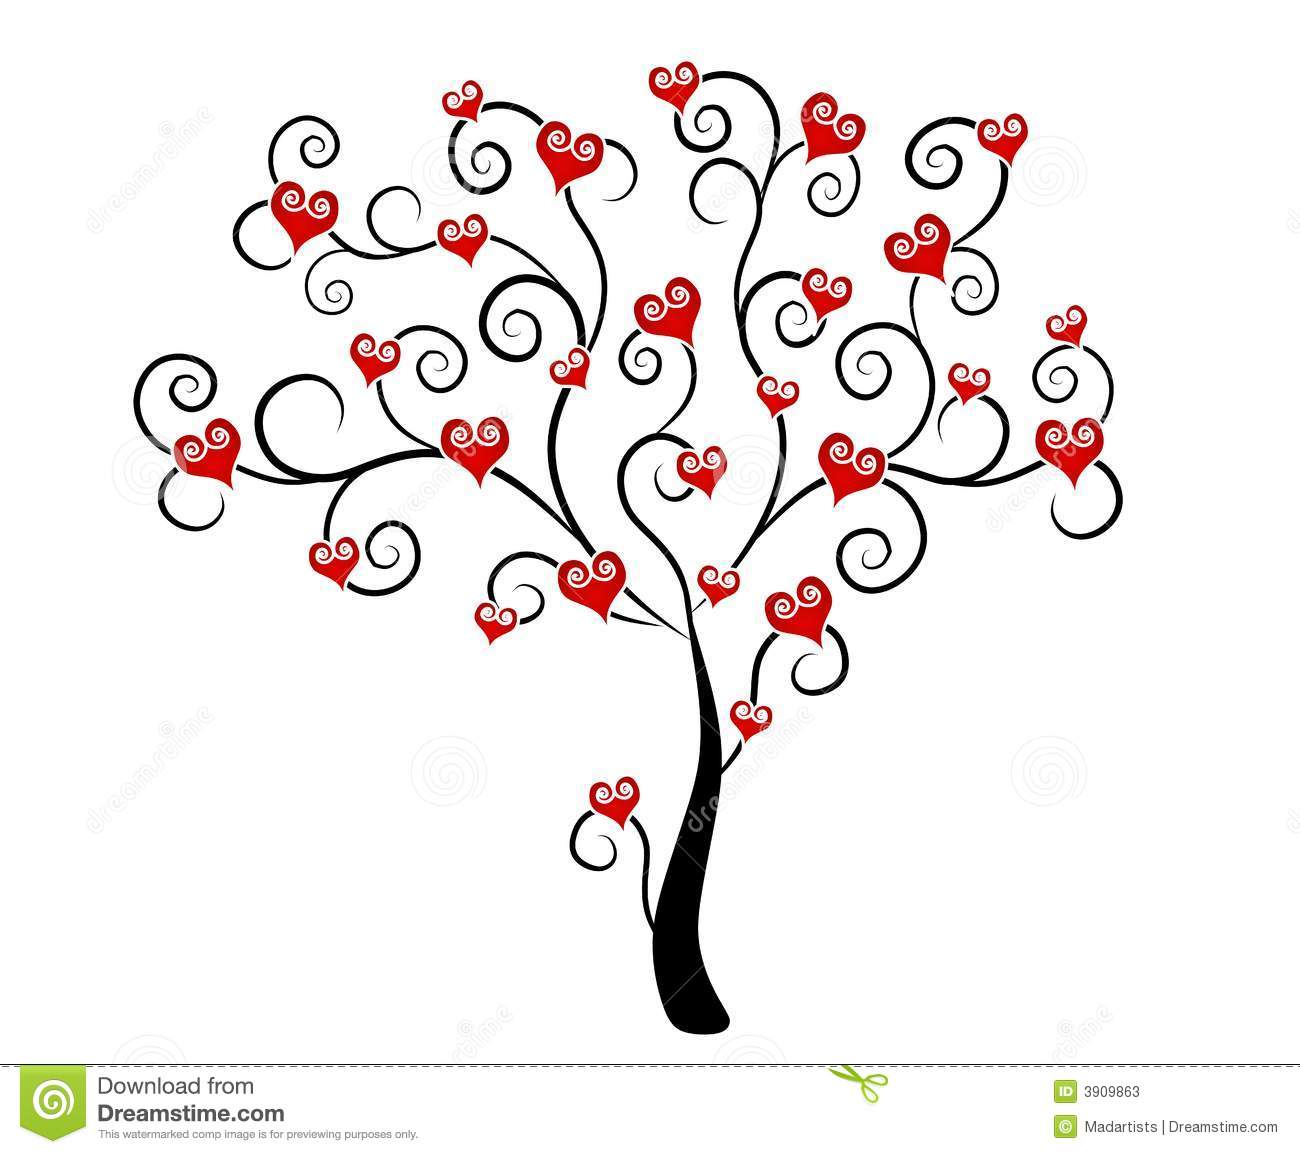 Clip Art Illustration Featuring A Tree Blooming With Decorative Red